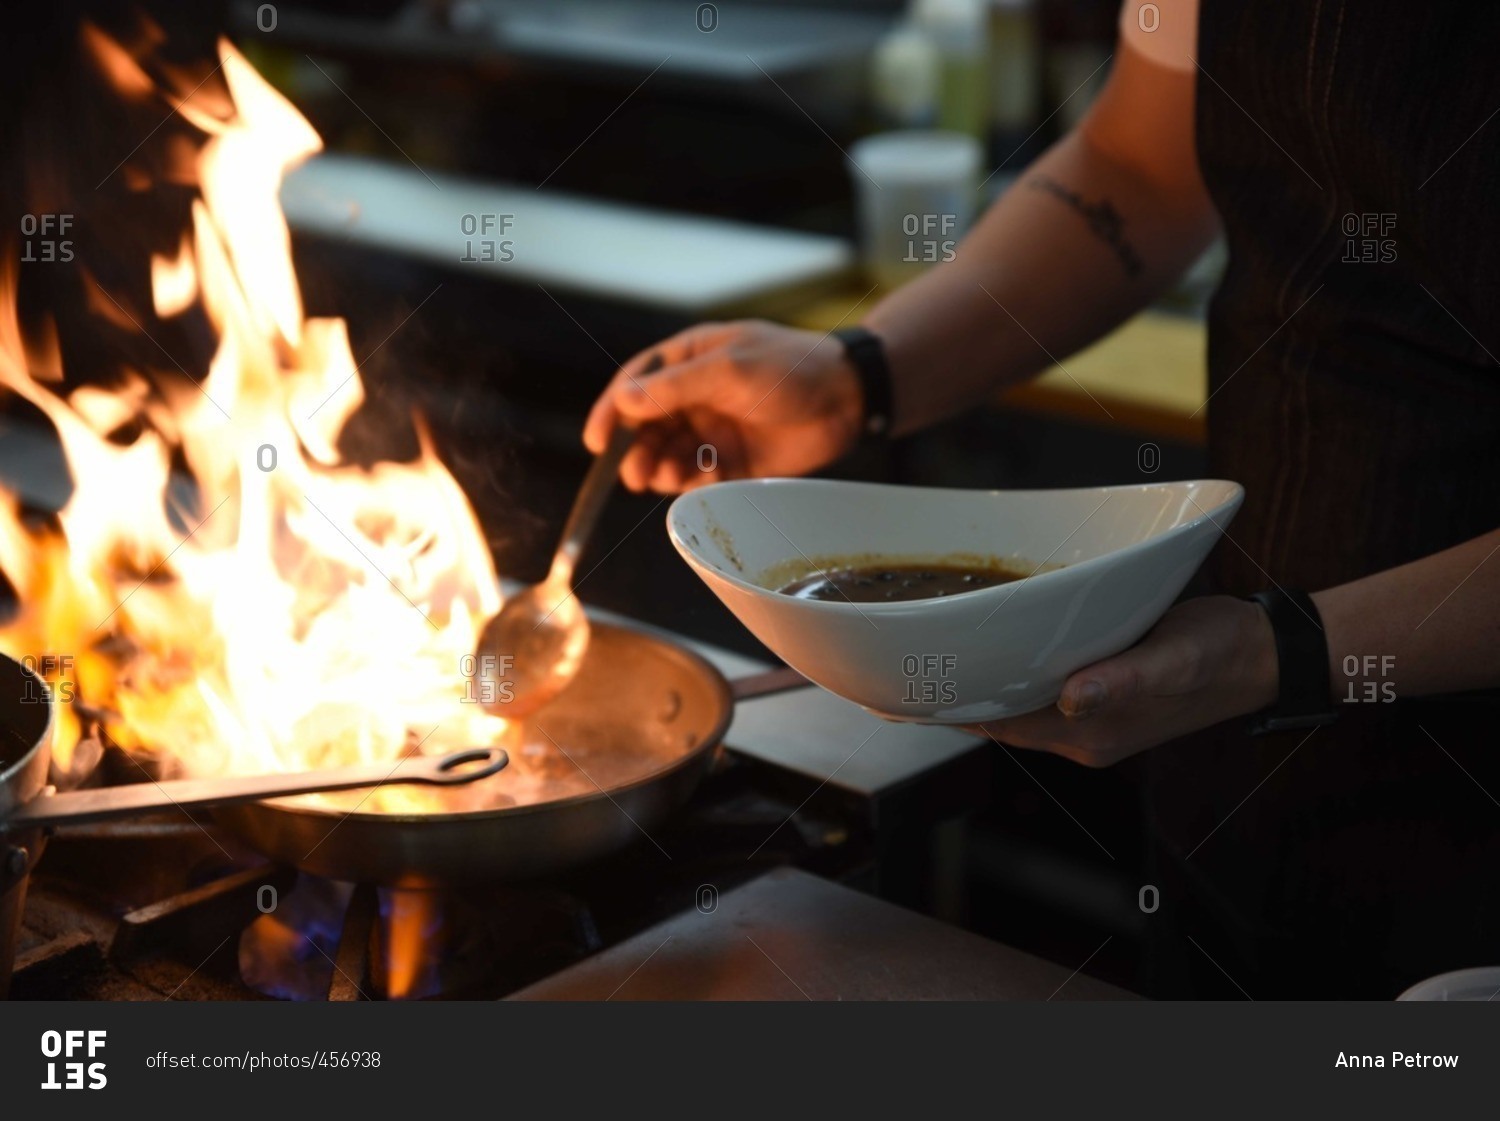 Person adding a spoonful of liquid to a flaming pan on a stove